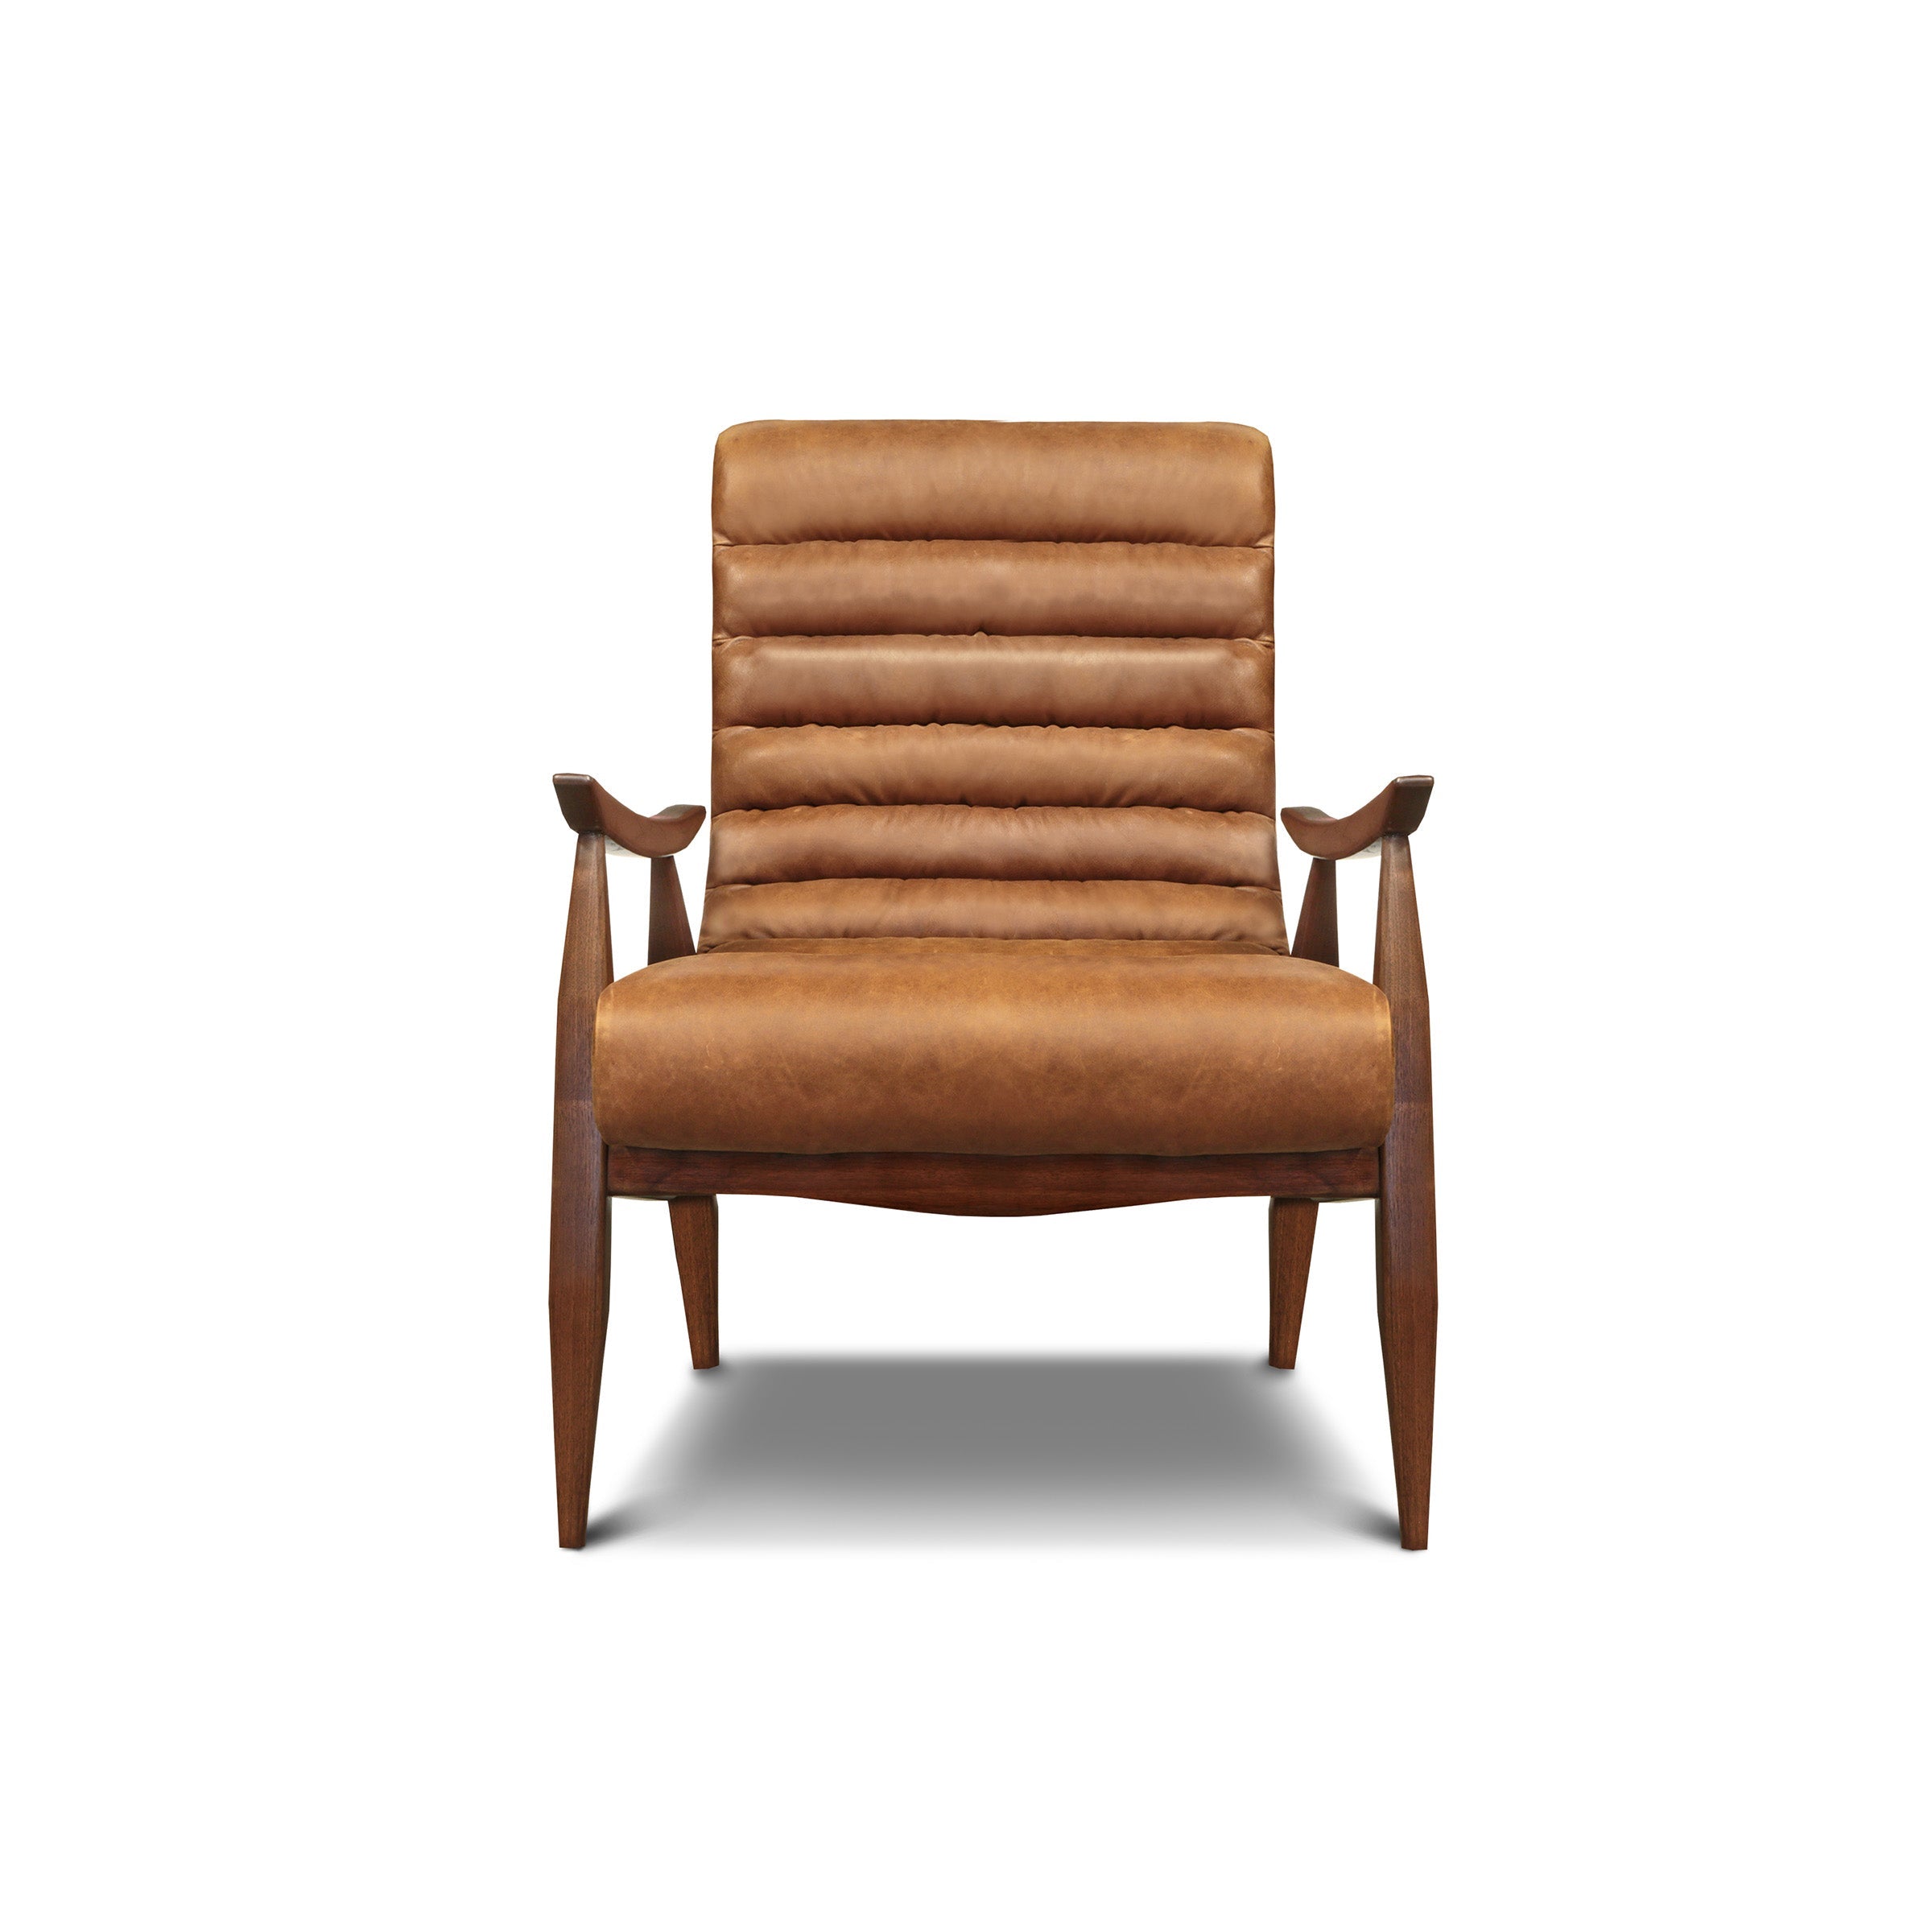 Eleanor Rigby Lily 1E Accent Chair